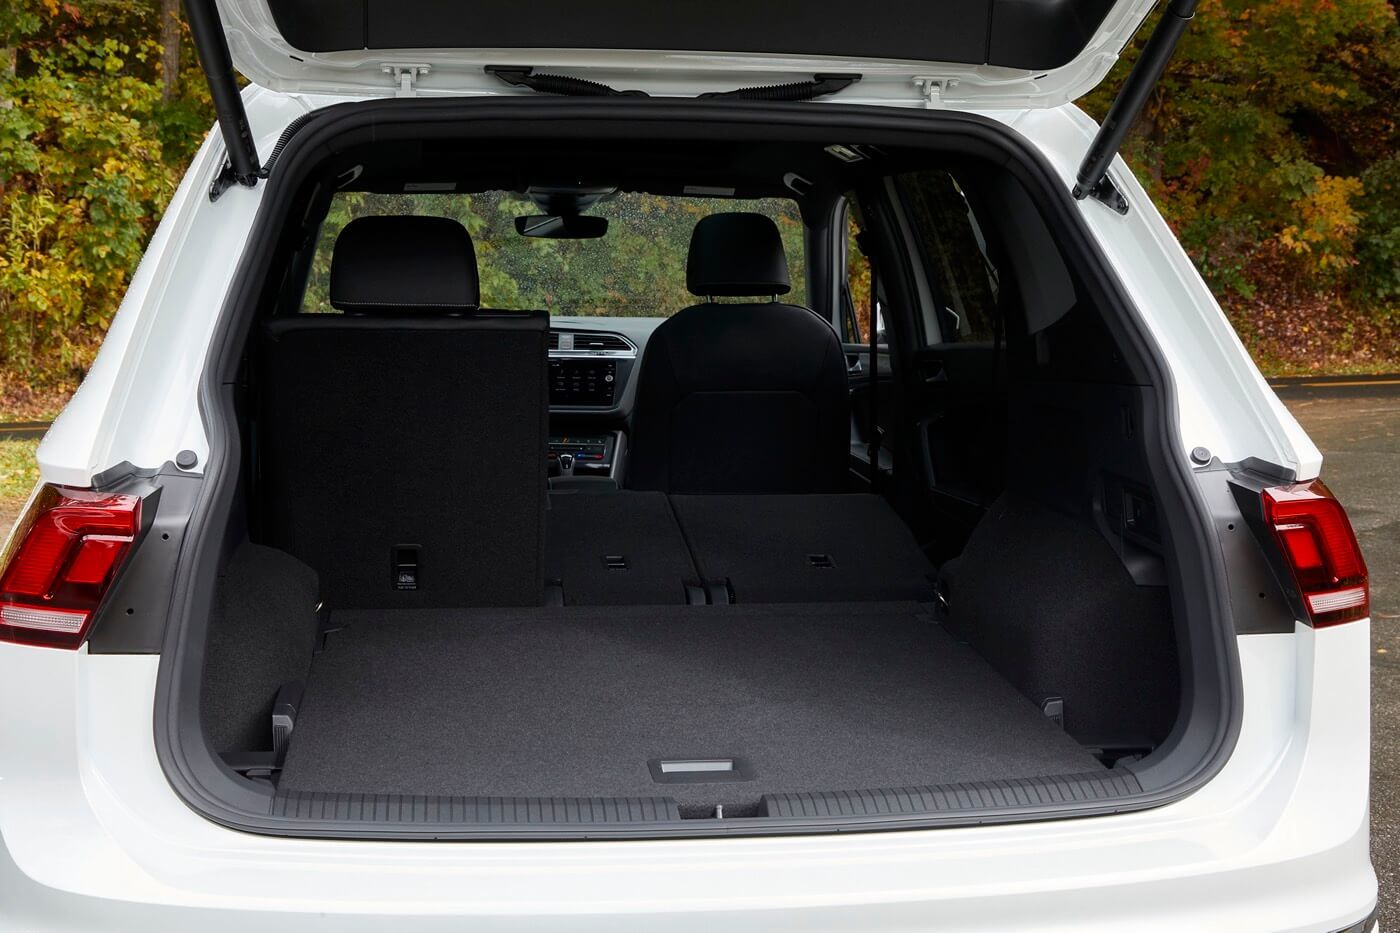 rear view of the 2022 Volkswagen Tiguan with the trunk door open and the rear row seats pushed down